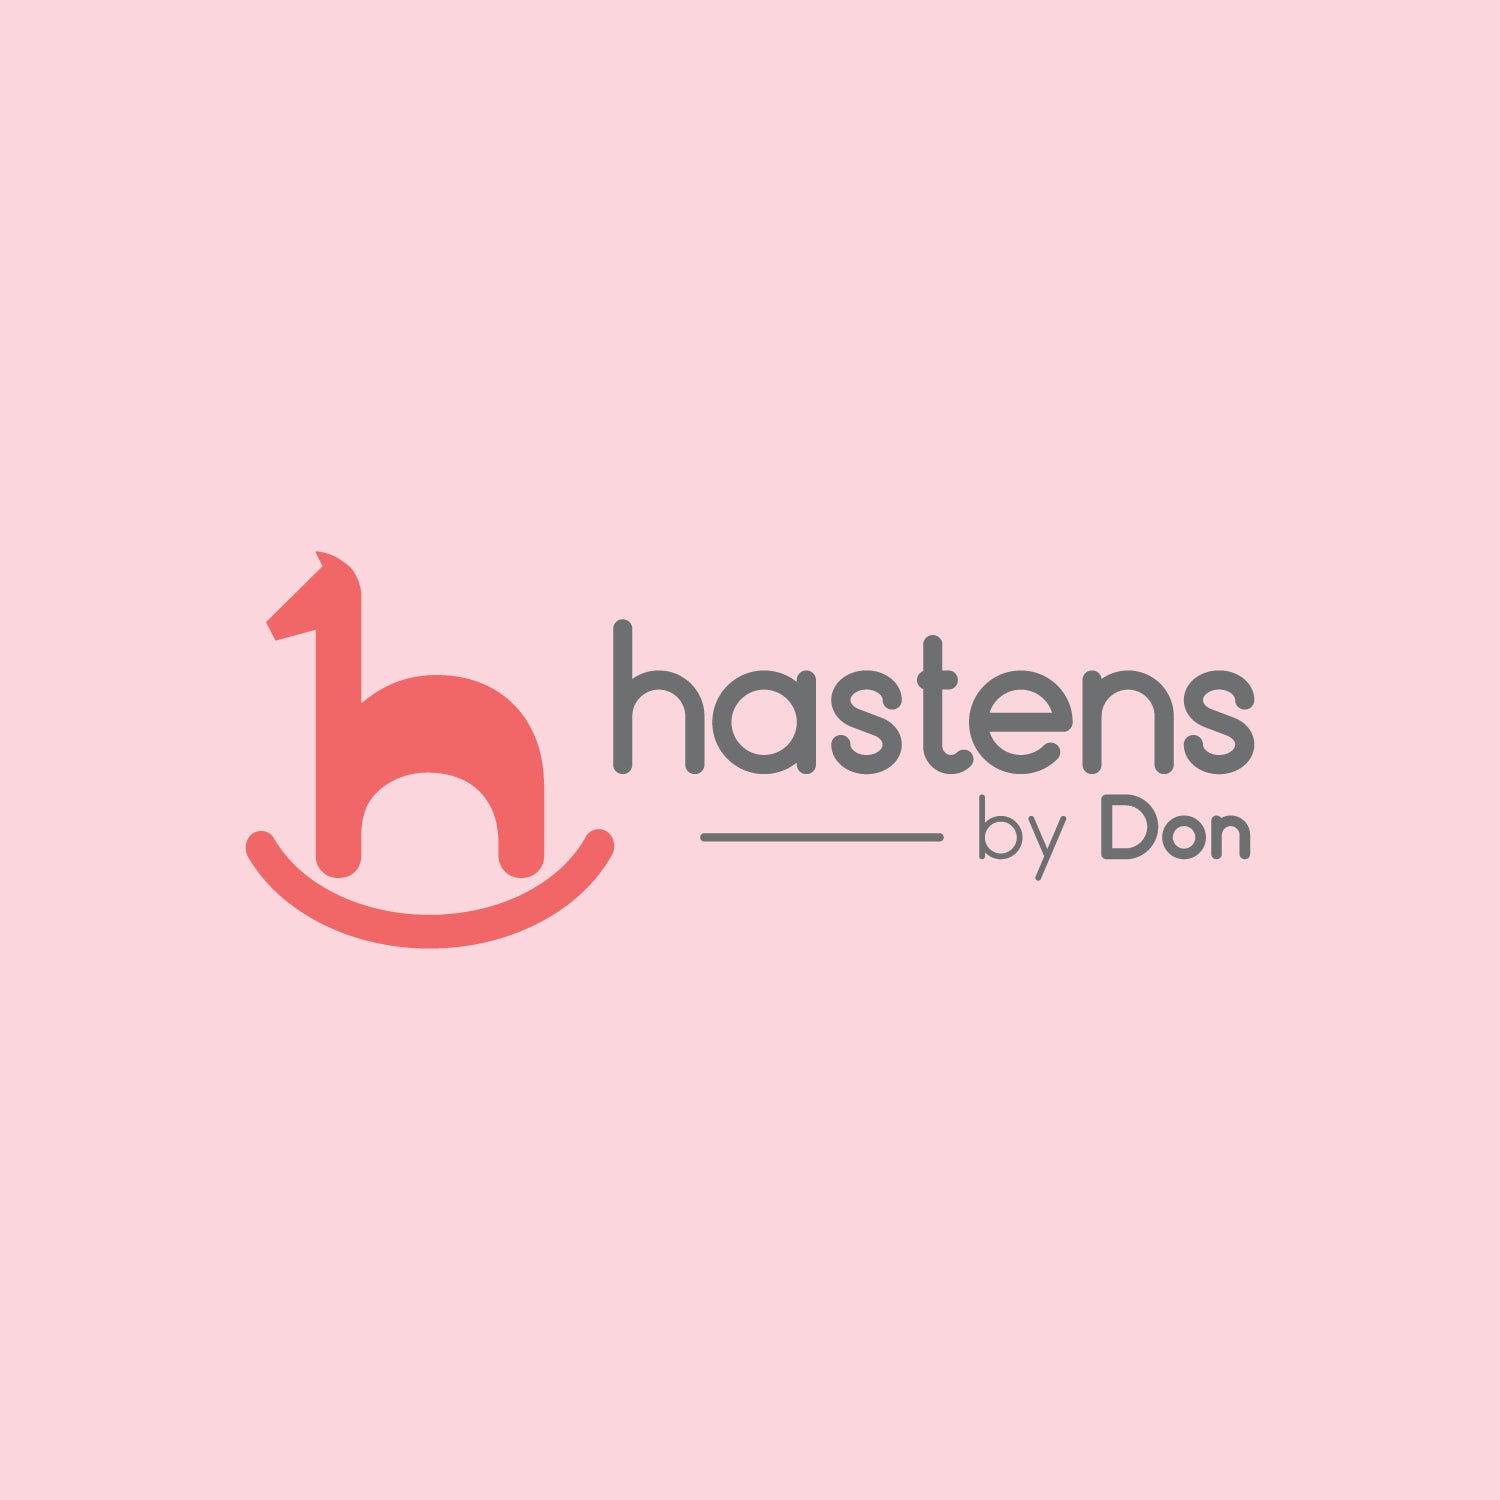 Hastens by Don